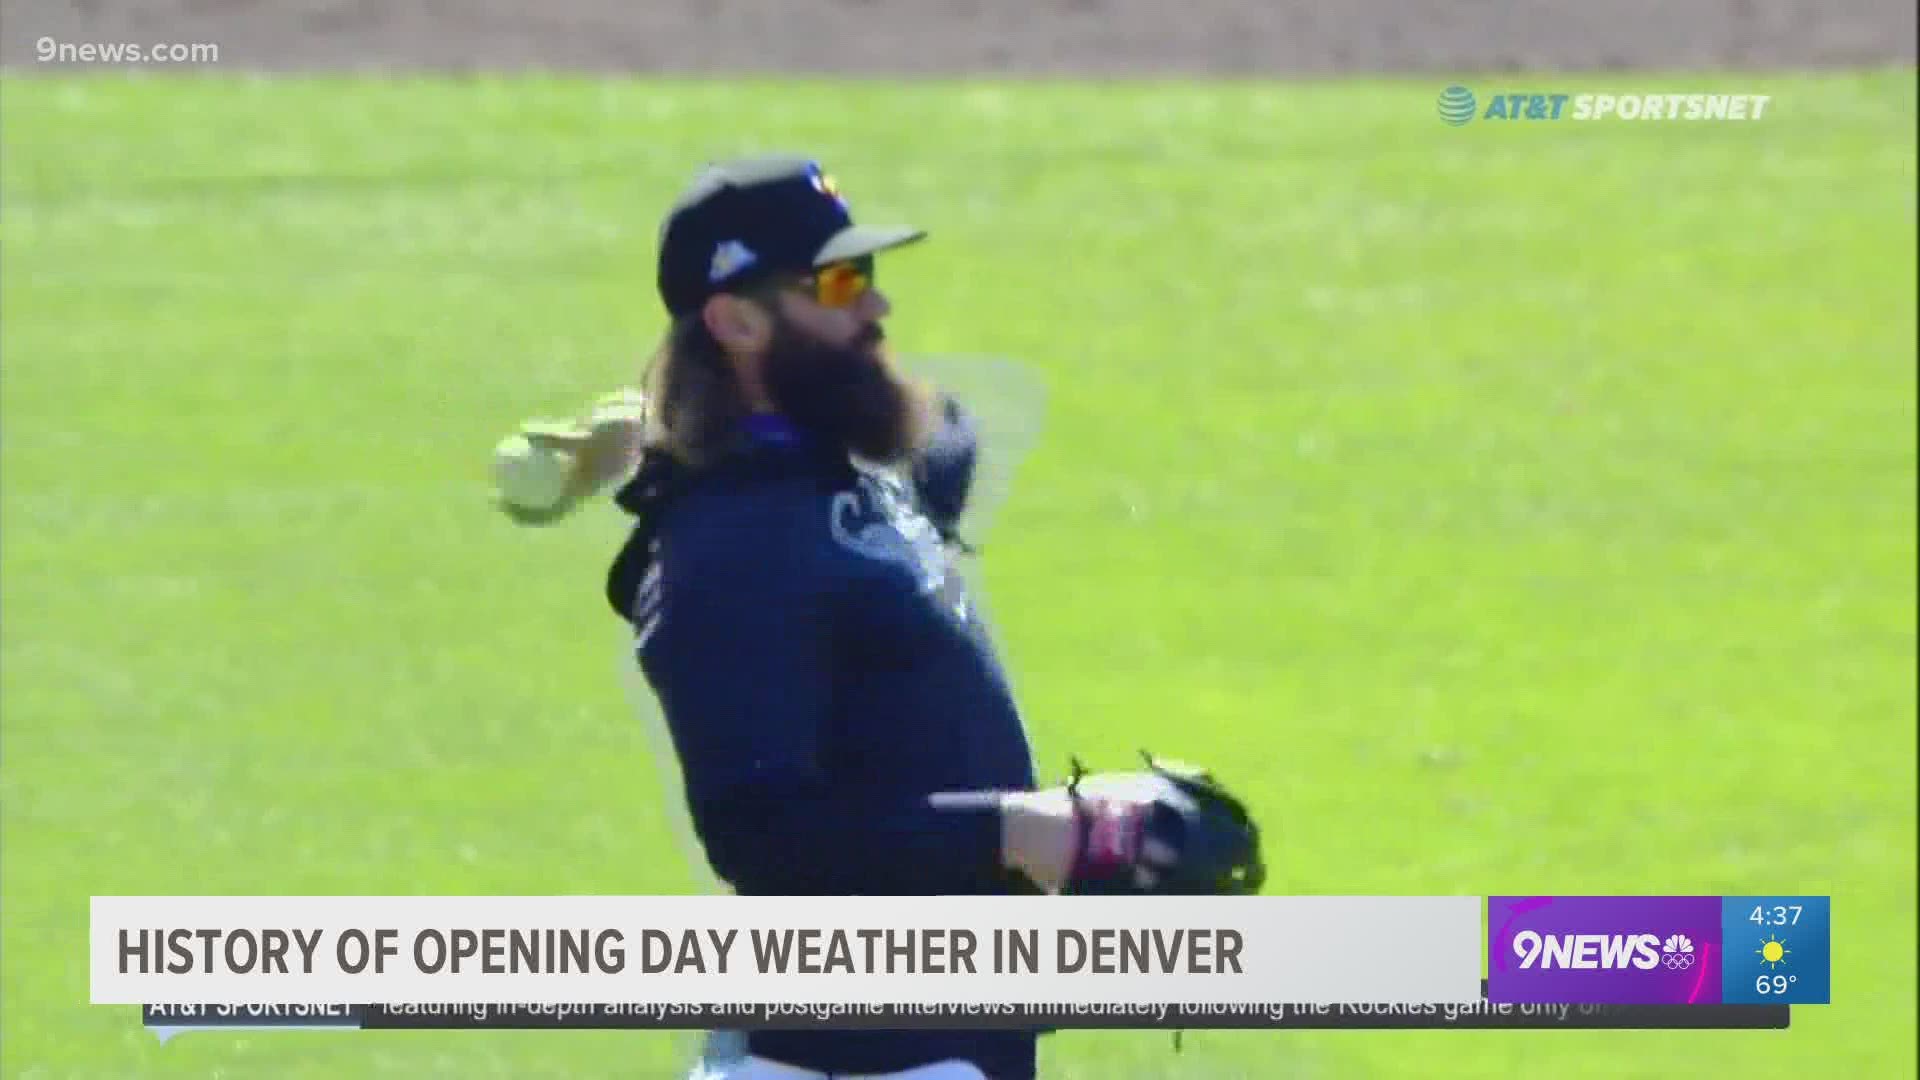 The official temperature at first pitch in today's home opener for the Rockies was 70 degrees.